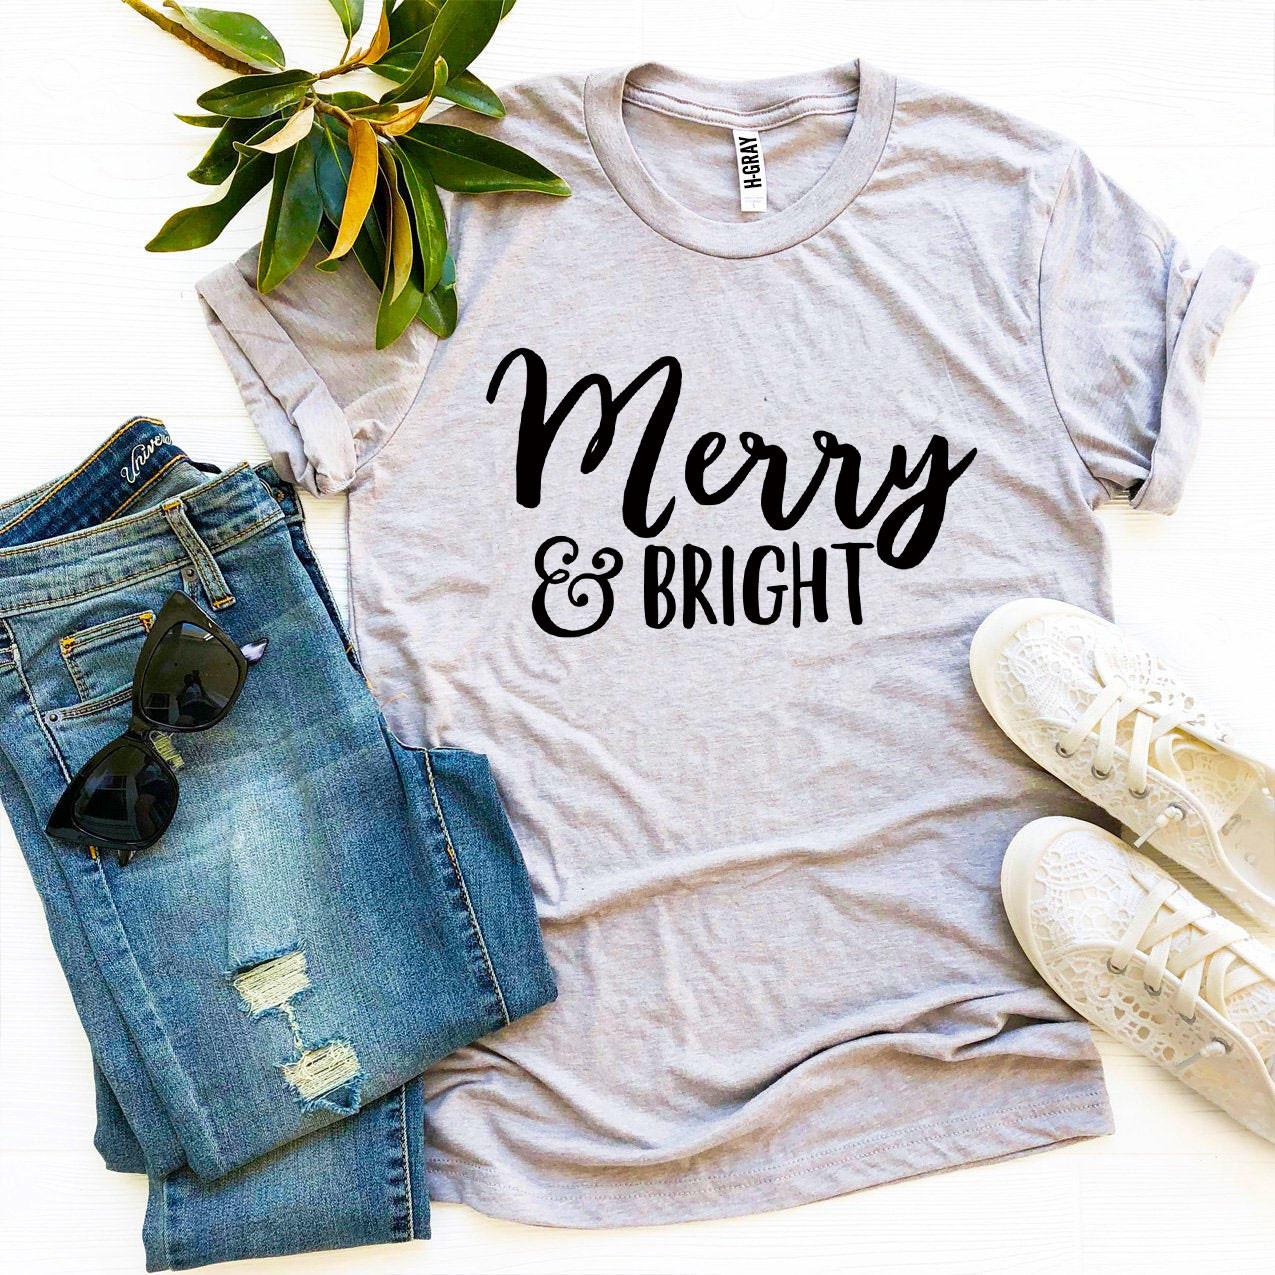 Merry And Bright T-shirt